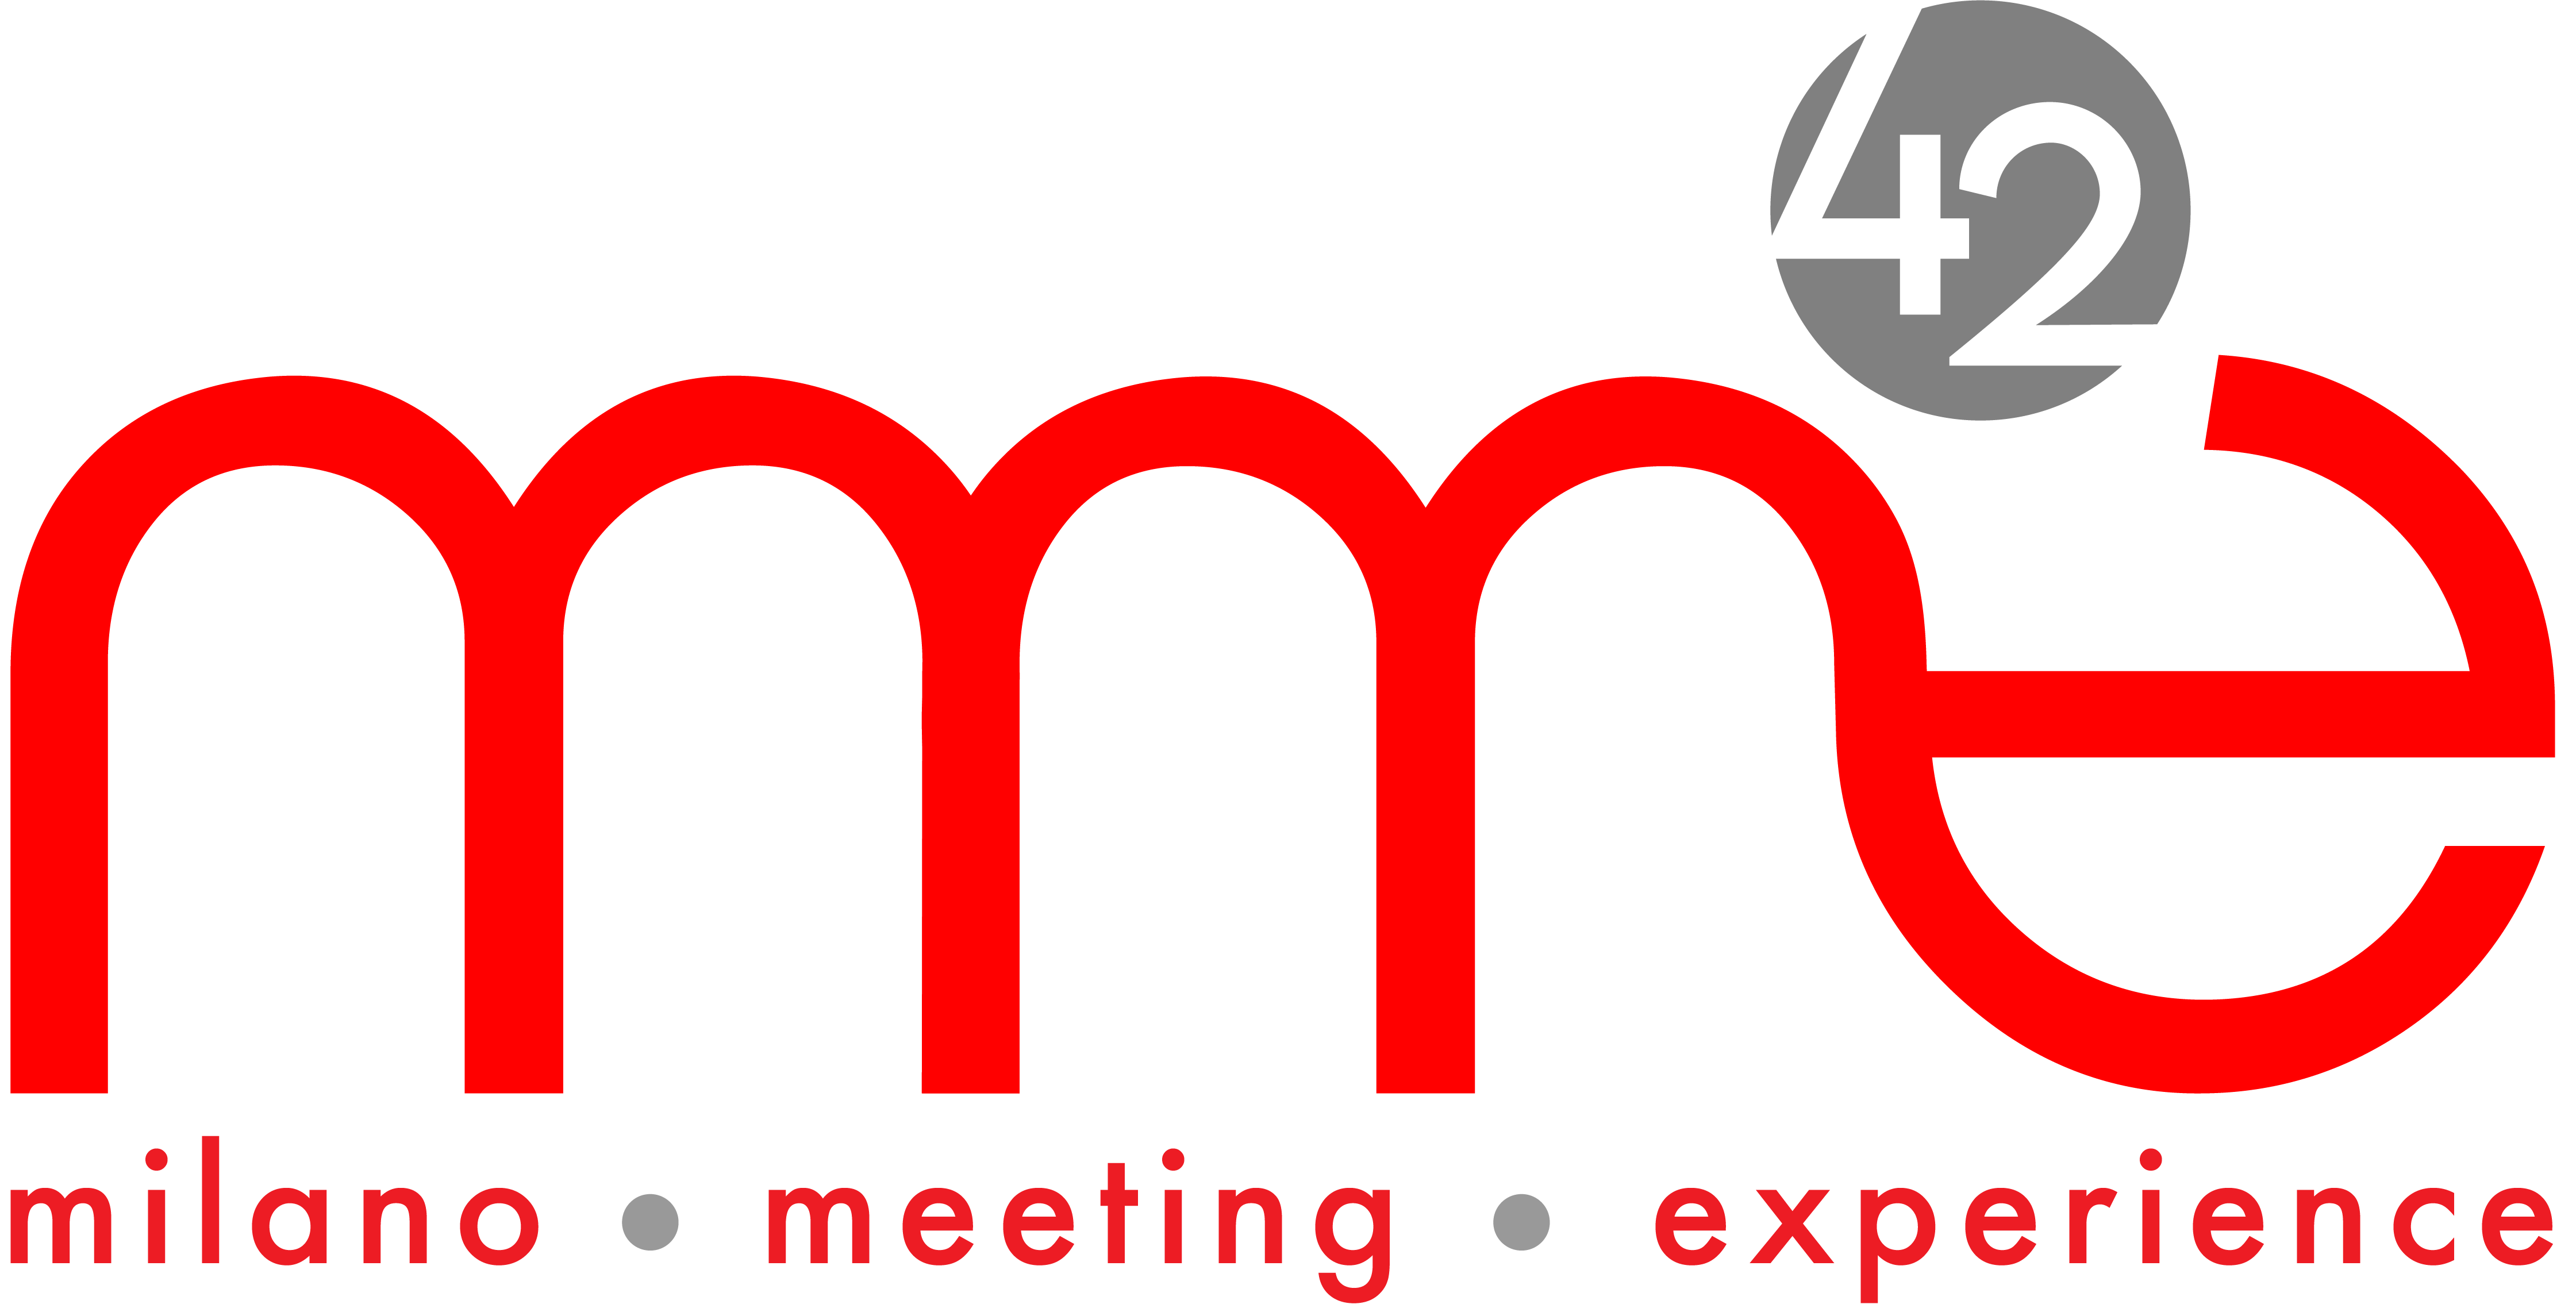 logo mme - Milano Meeting Experience 42